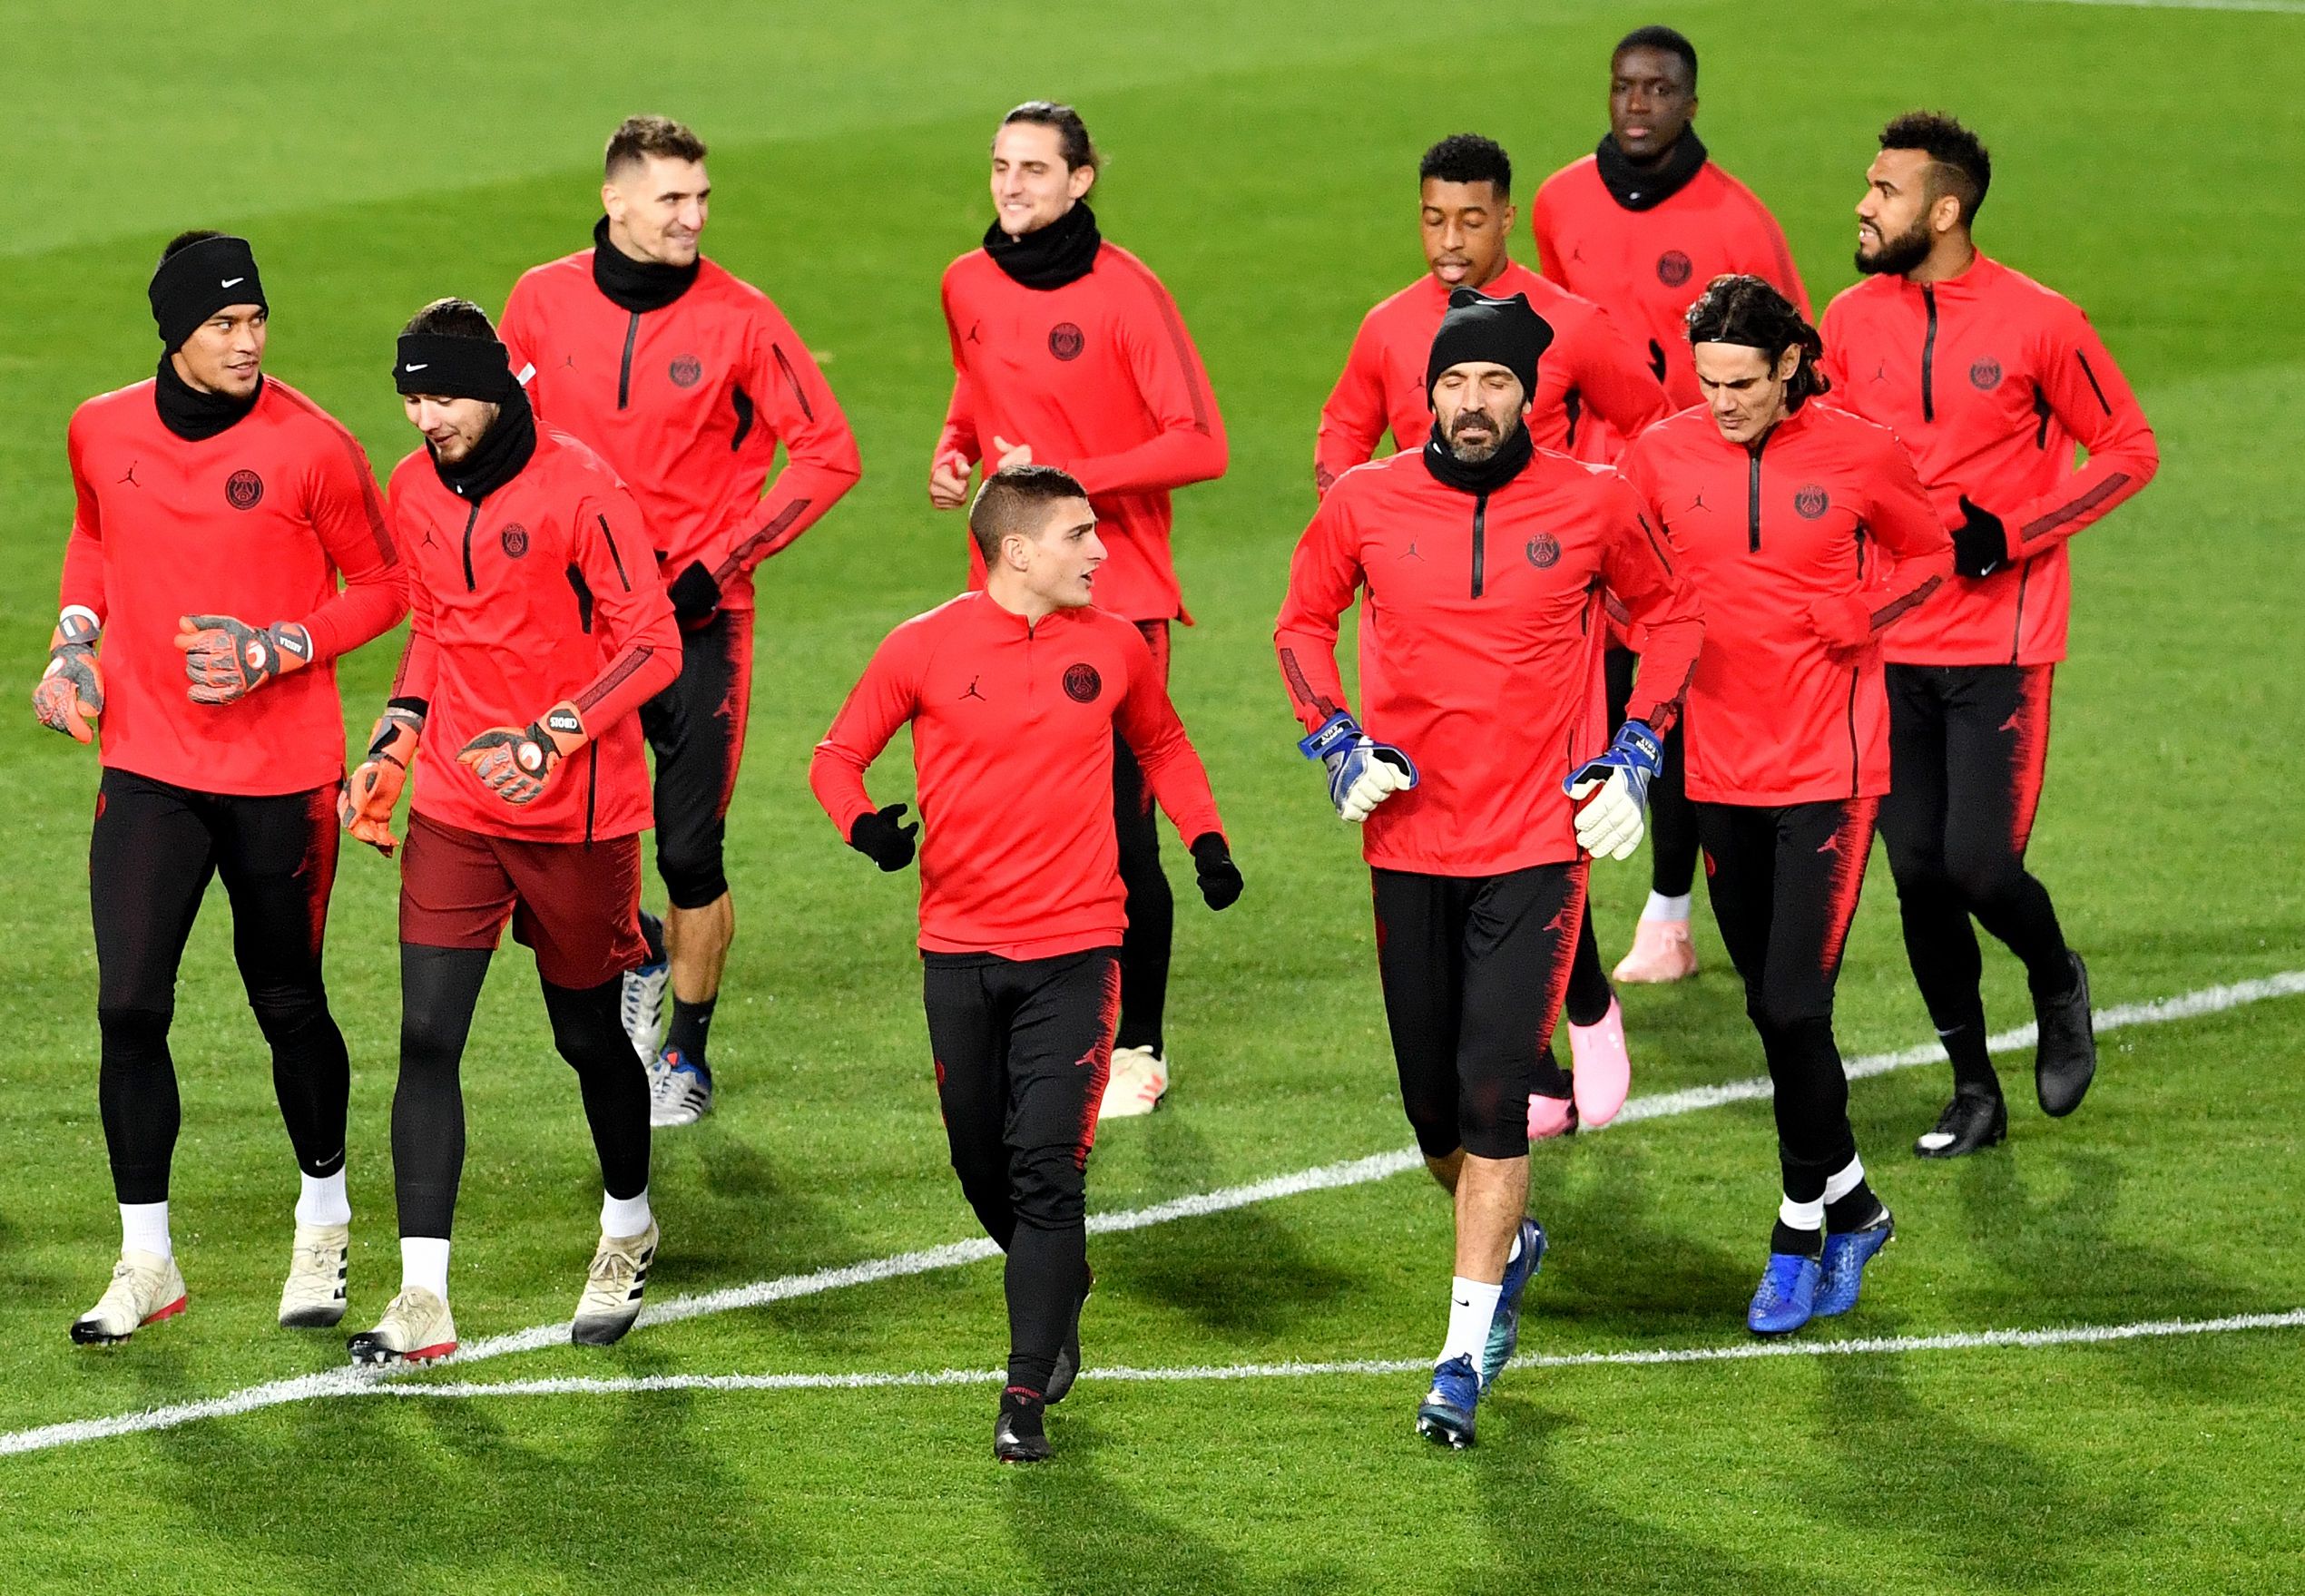 Paris Saint-Germain's team players take part in a training session at the Rajko Mitic stadium in Belgrade on December 10, 2018 on the eve of the UEFA Champions League football match between Red Star Belgrade and Paris Saint-Germain. (Photo by ANDREJ ISAKOVIC / AFP)        (Photo credit should read ANDREJ ISAKOVIC/AFP/Getty Images)